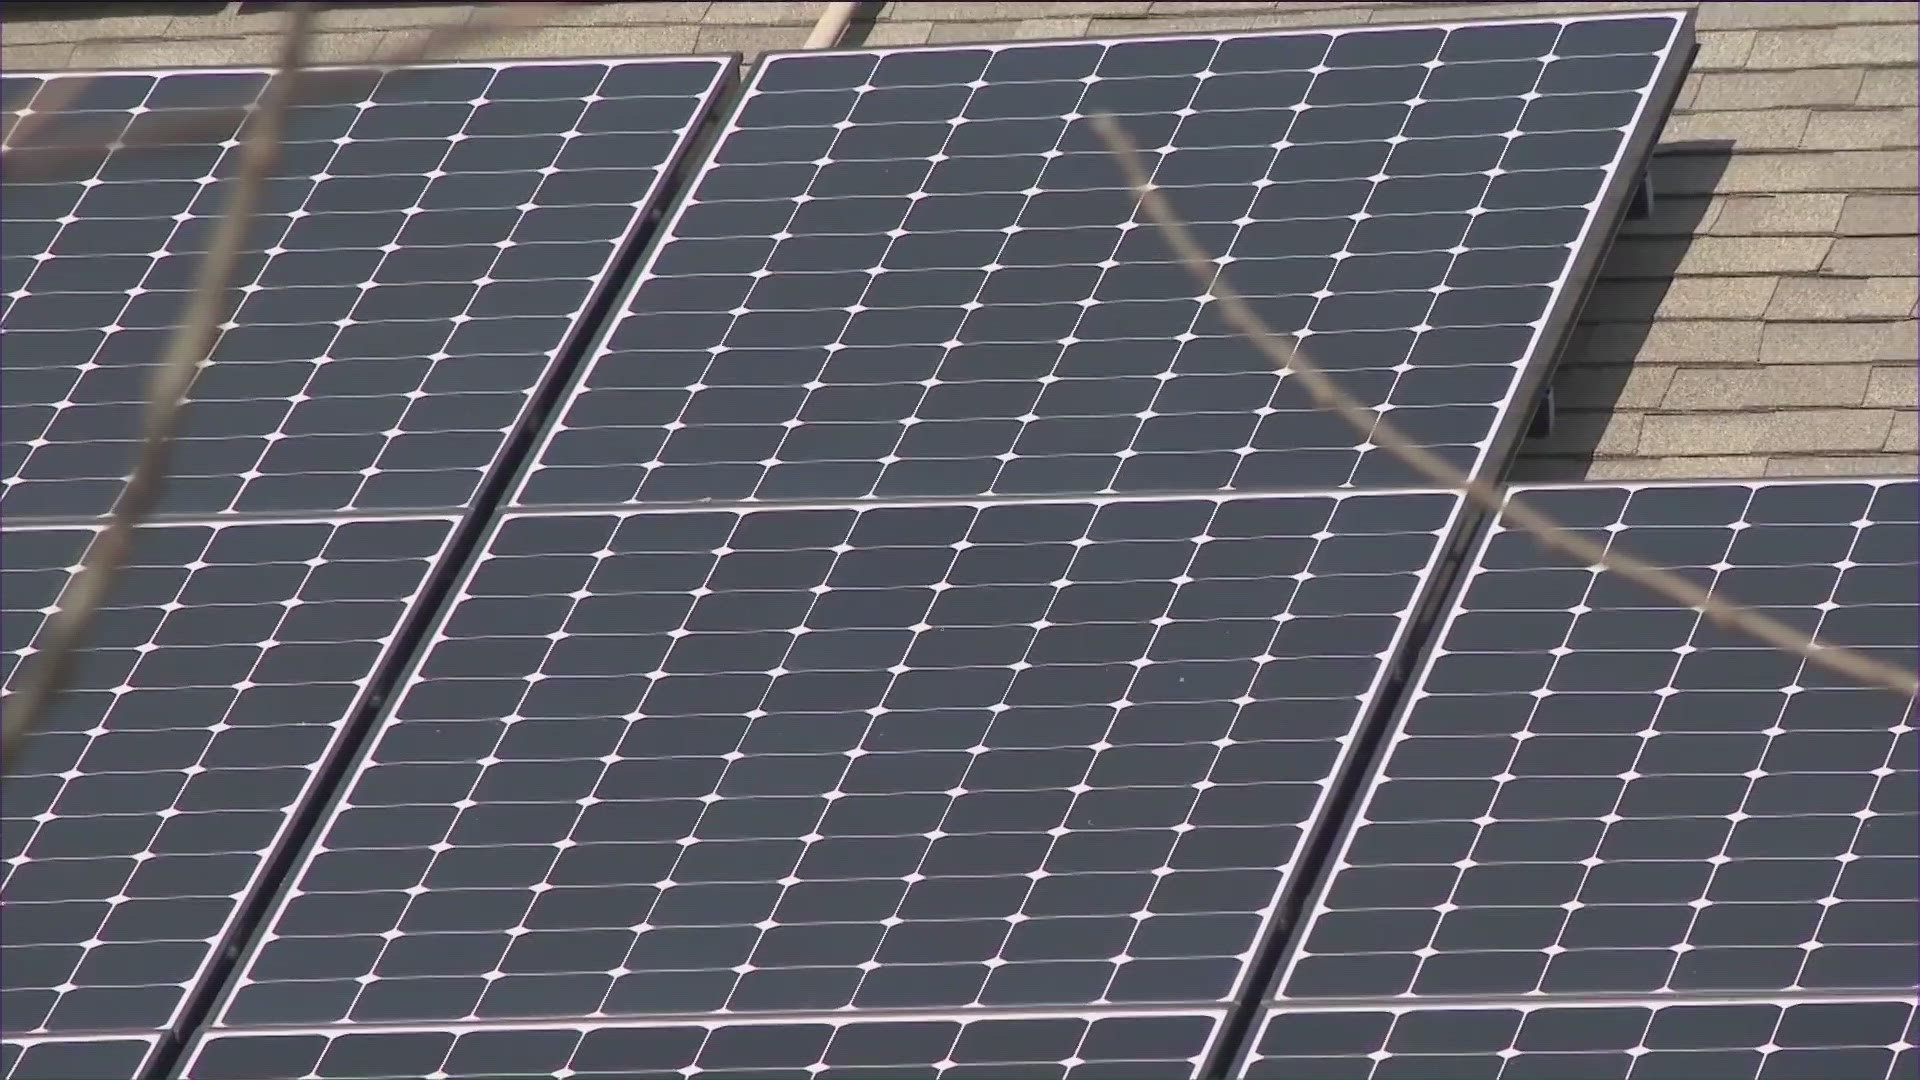 Some homeowners may be working on home improvement projects this summer, and experts say going solar is an option that could save money in the long run.